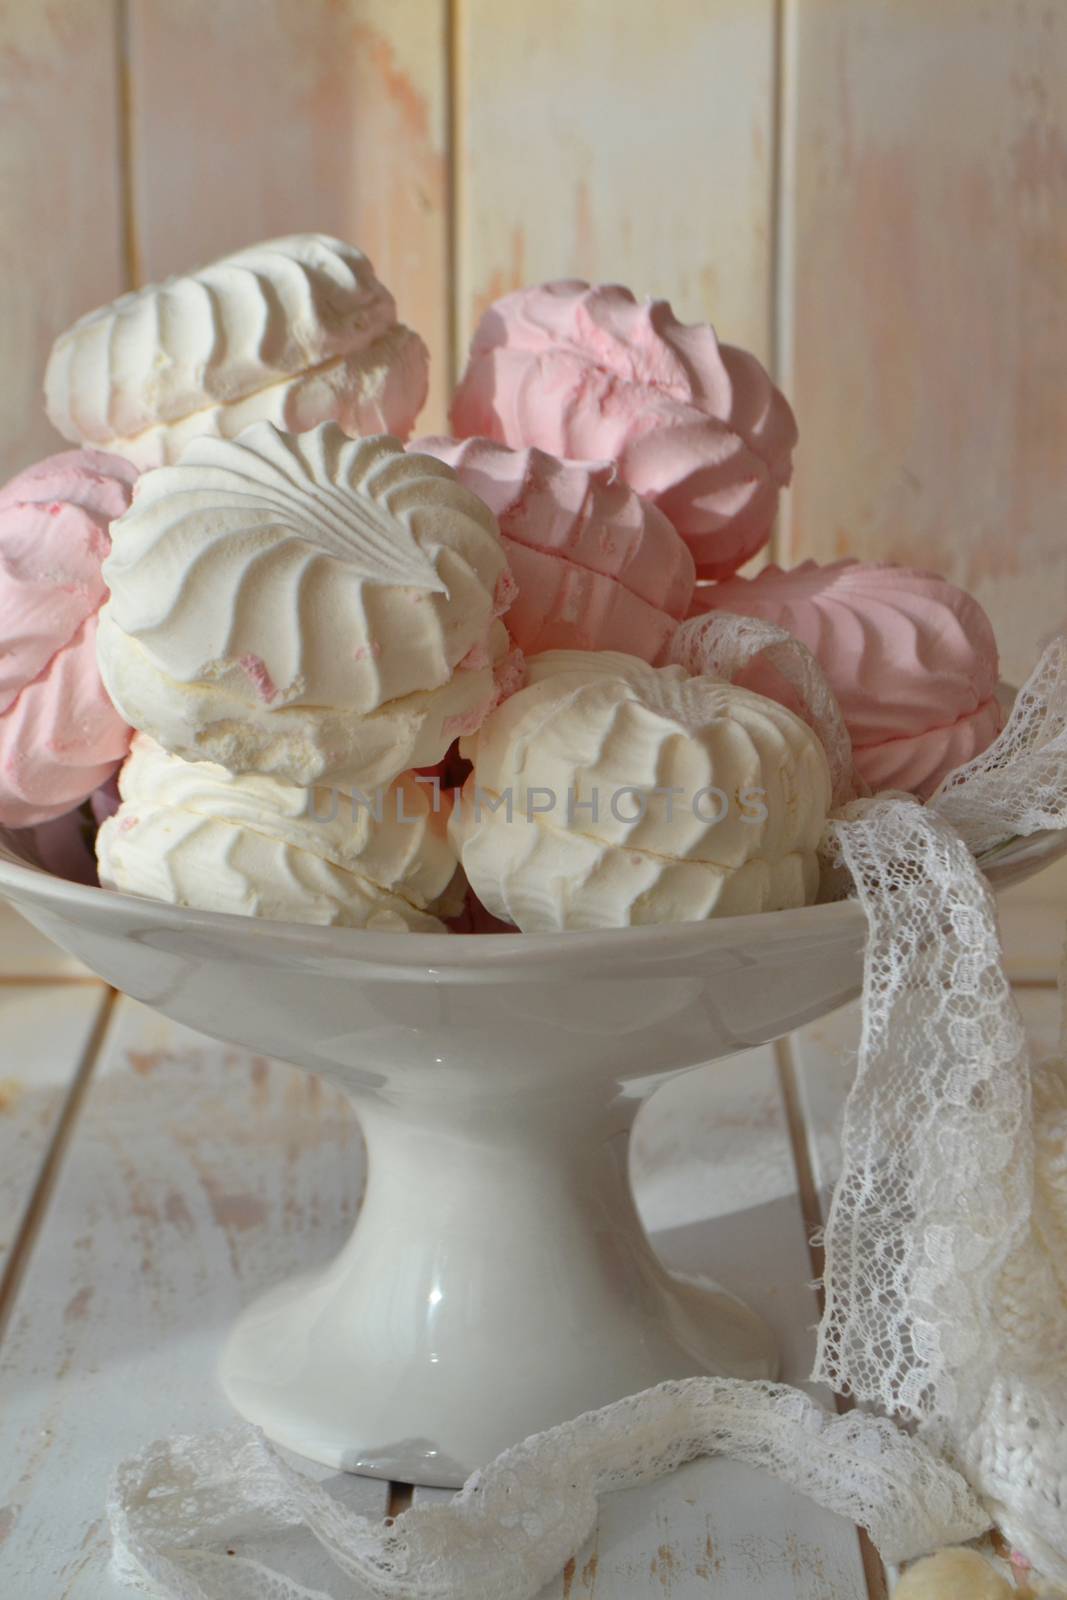 Russian dessert with agar soft sweet light and airy marshmallow meringue, white and pink zefir, vertical image